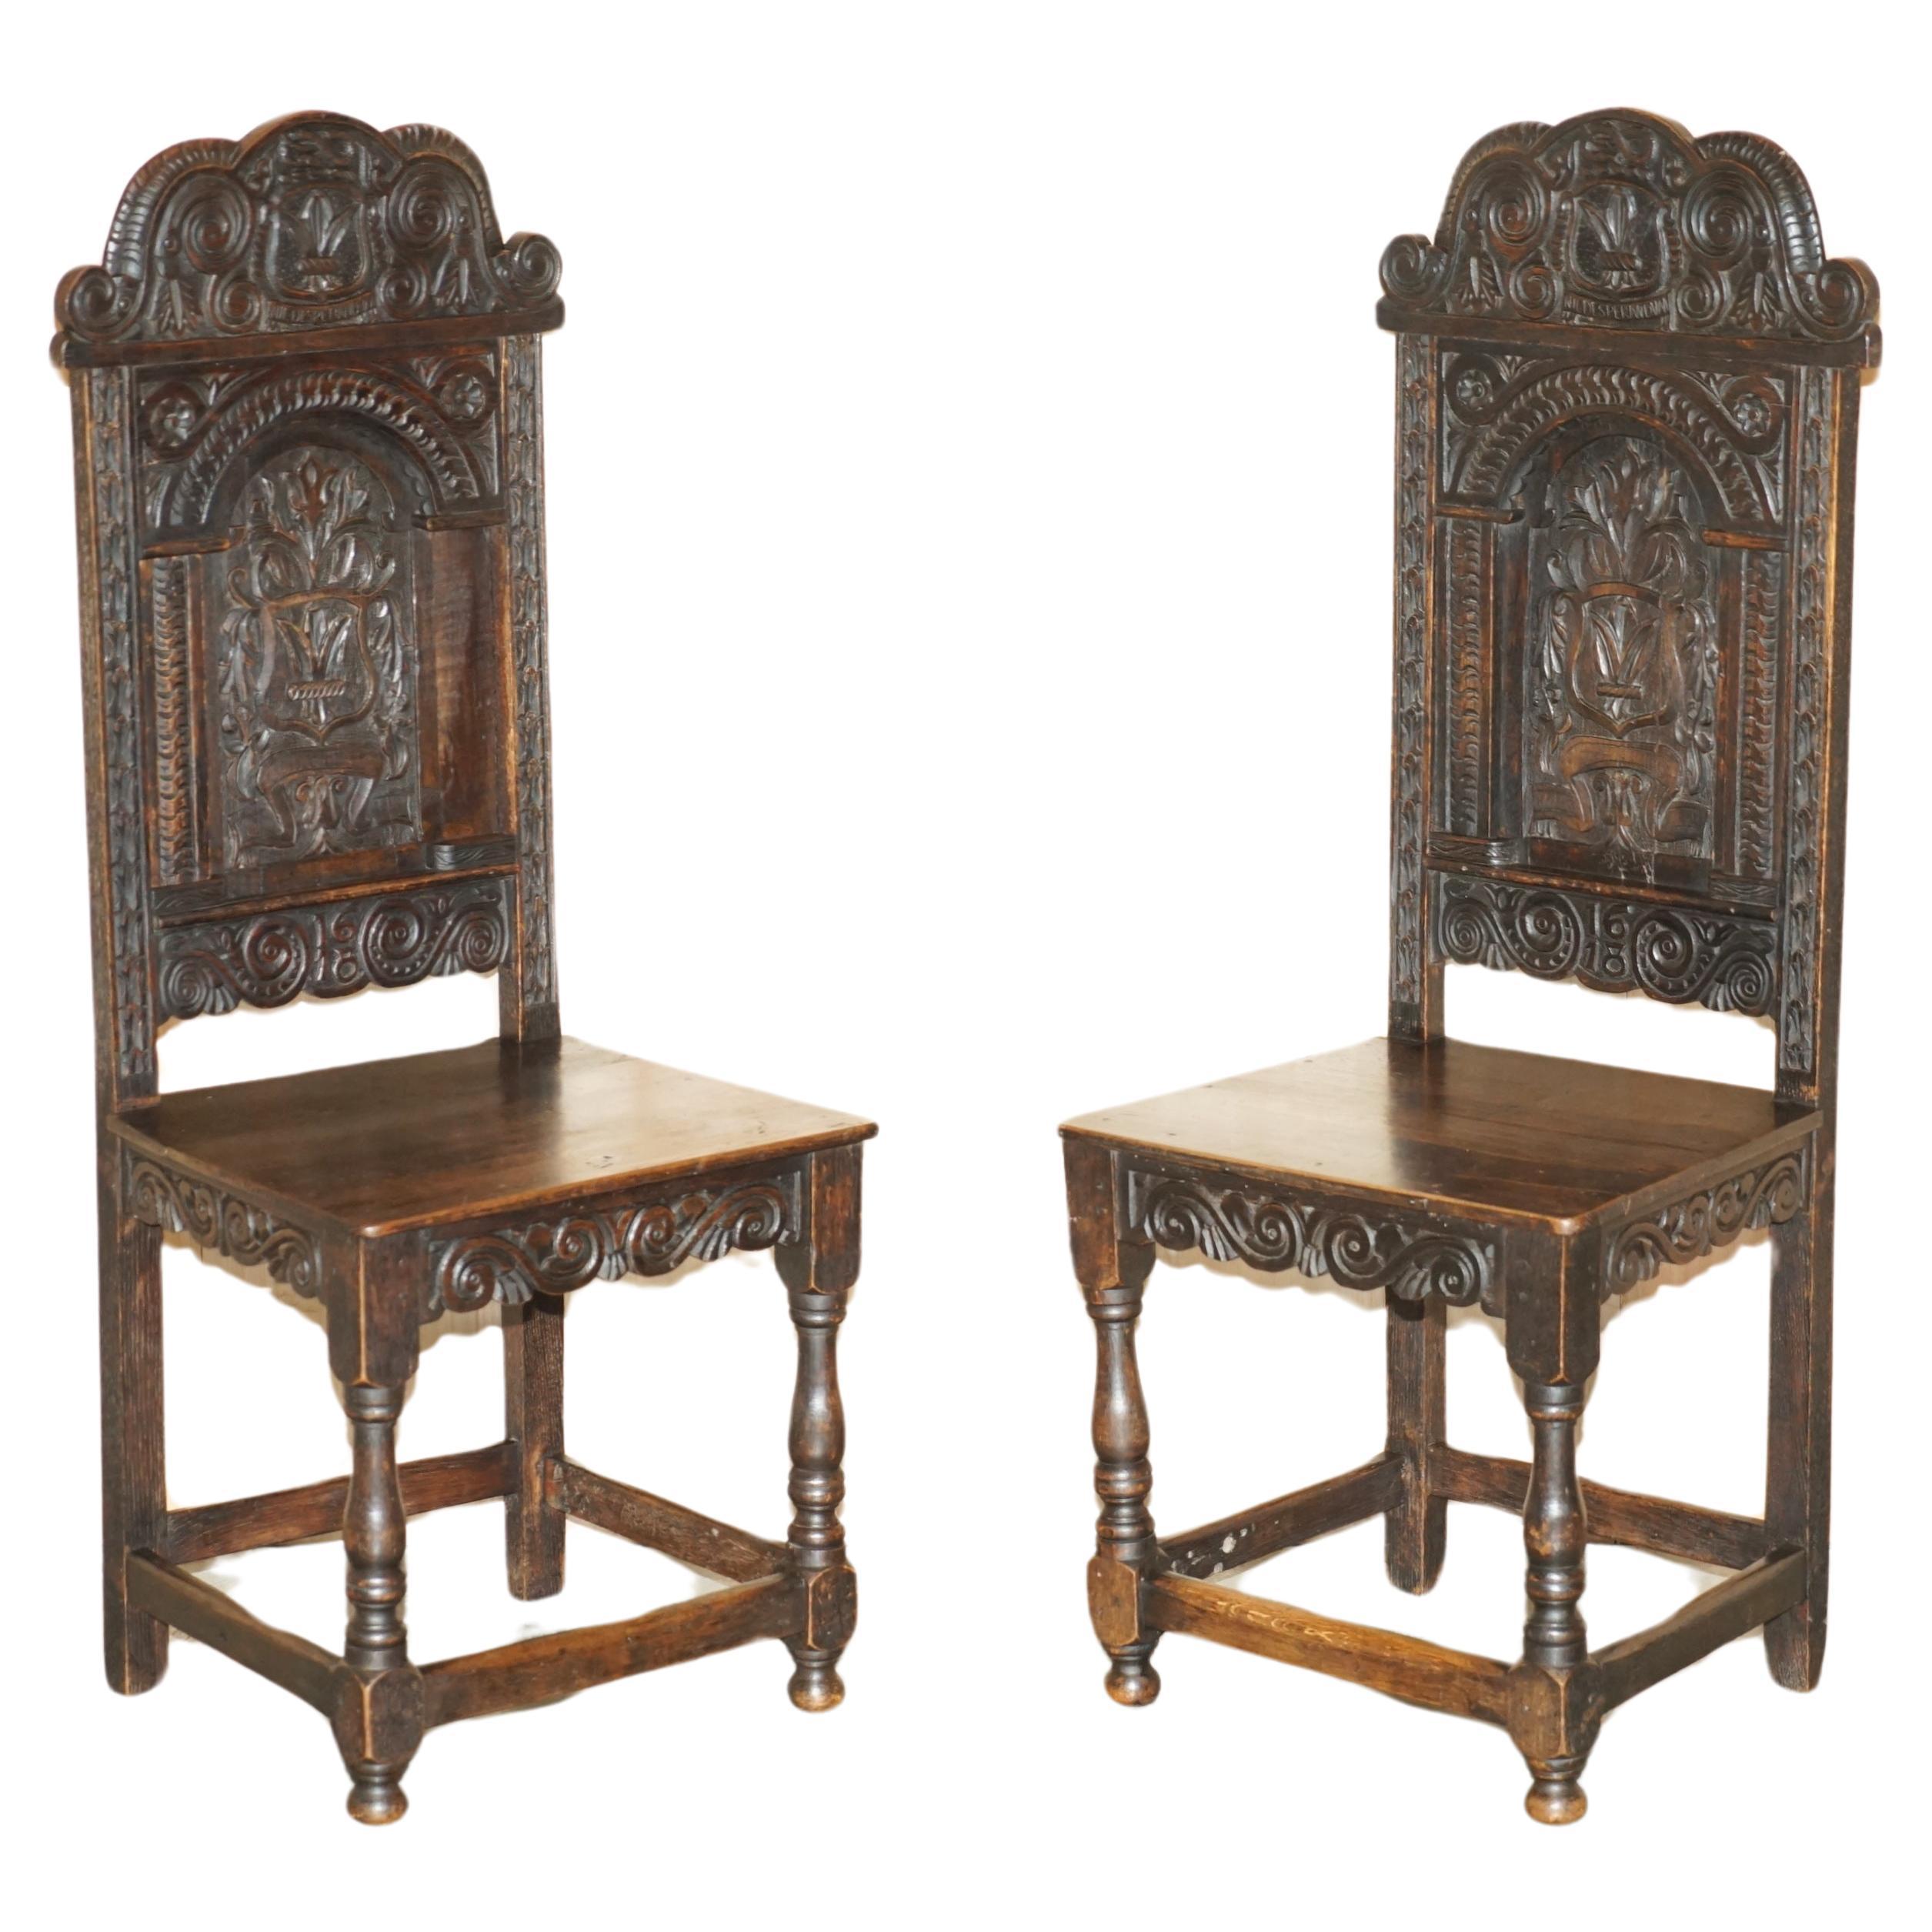 ANTIQUE PAIR OF 17TH CENTURY JACOBEAN ENGLISH OAK CHAIRS FROM THE FILM HELLBOy im Angebot